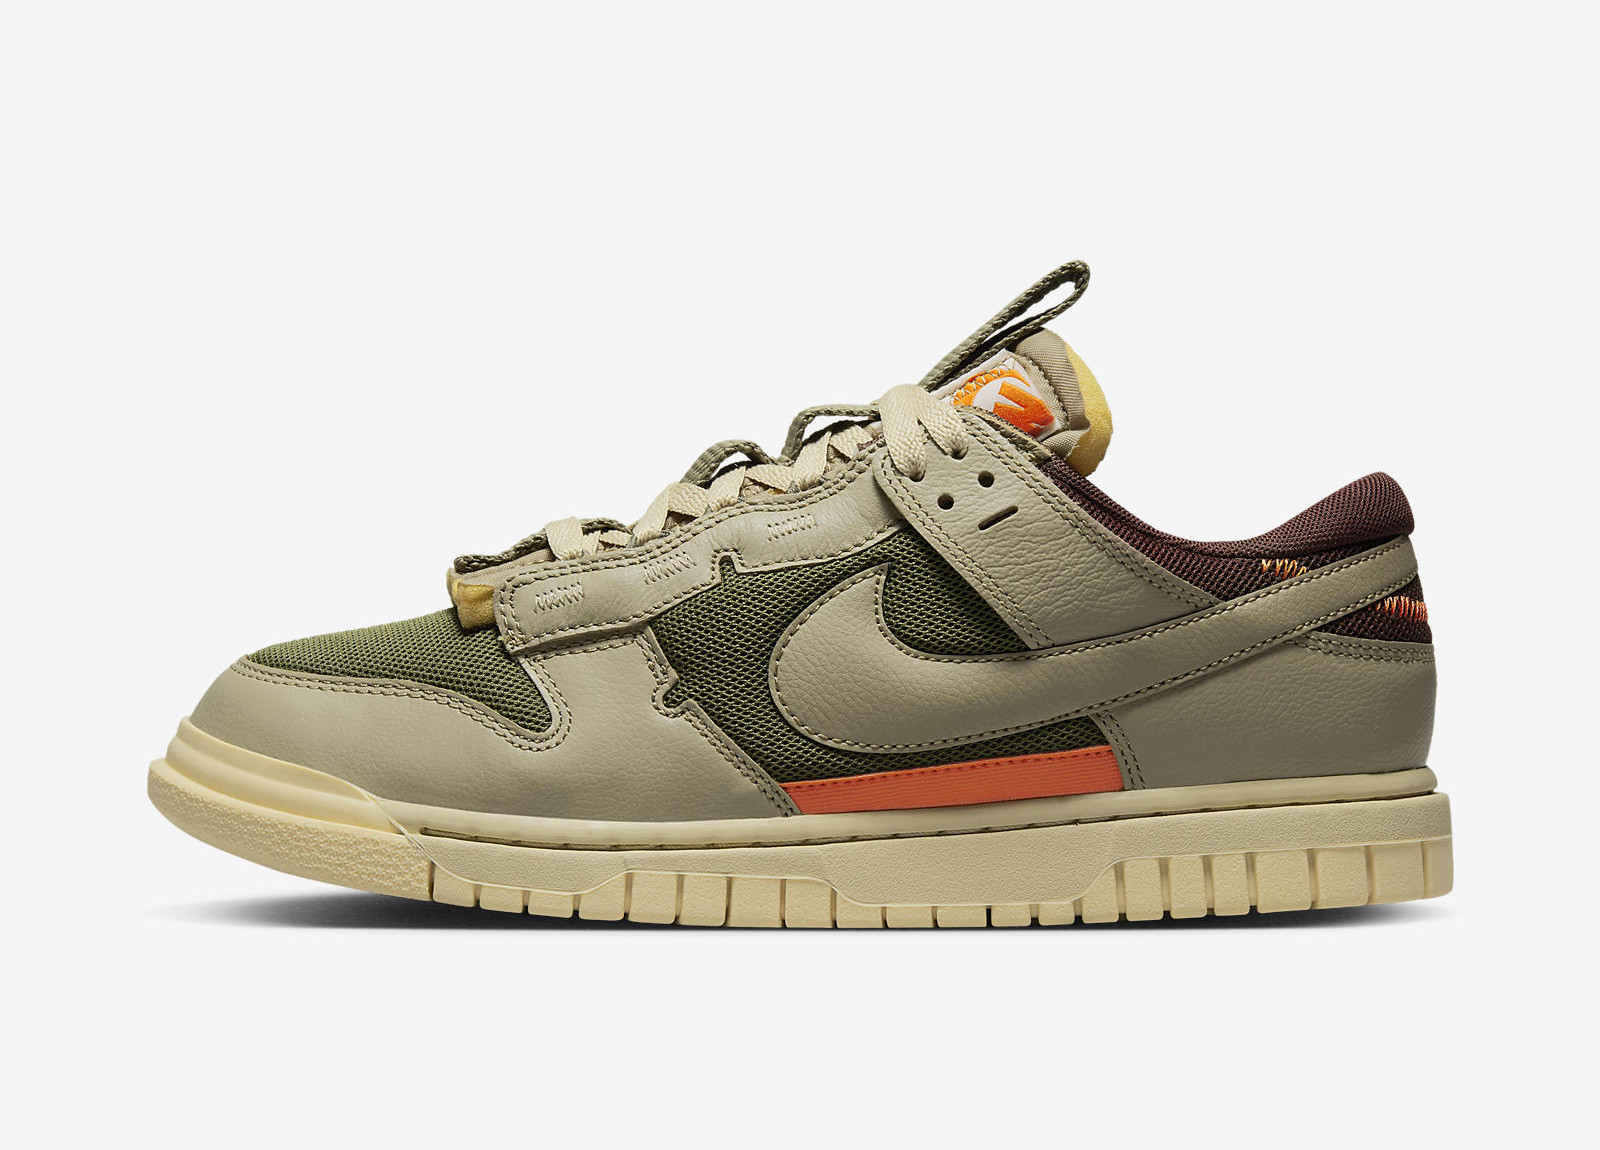 Nike Dunk Low
Remastered Olive